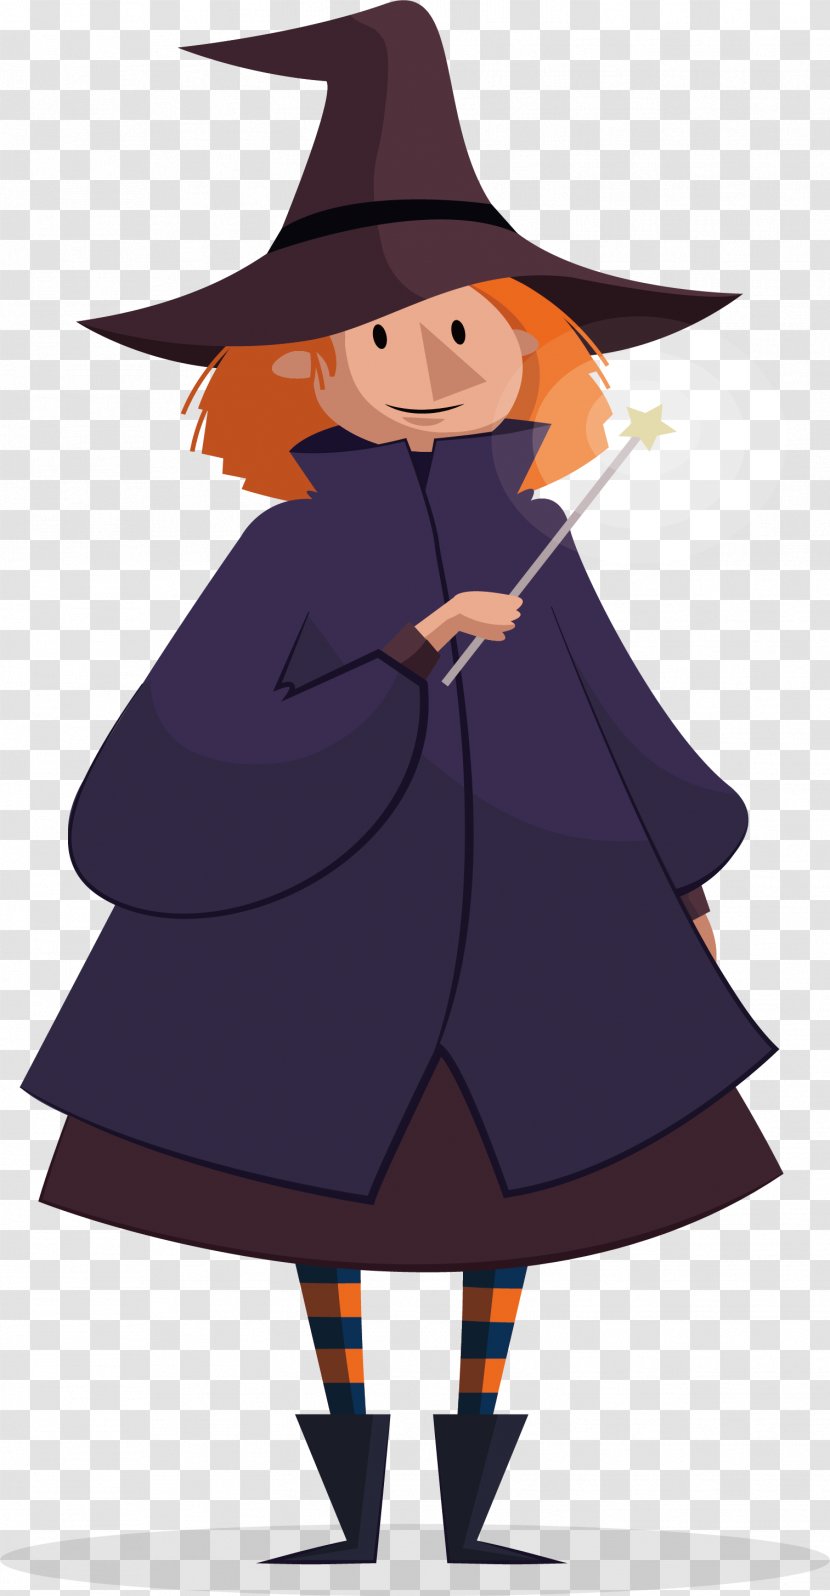 Witchcraft Illustration - Halloween - Witch Robe Transparent PNG